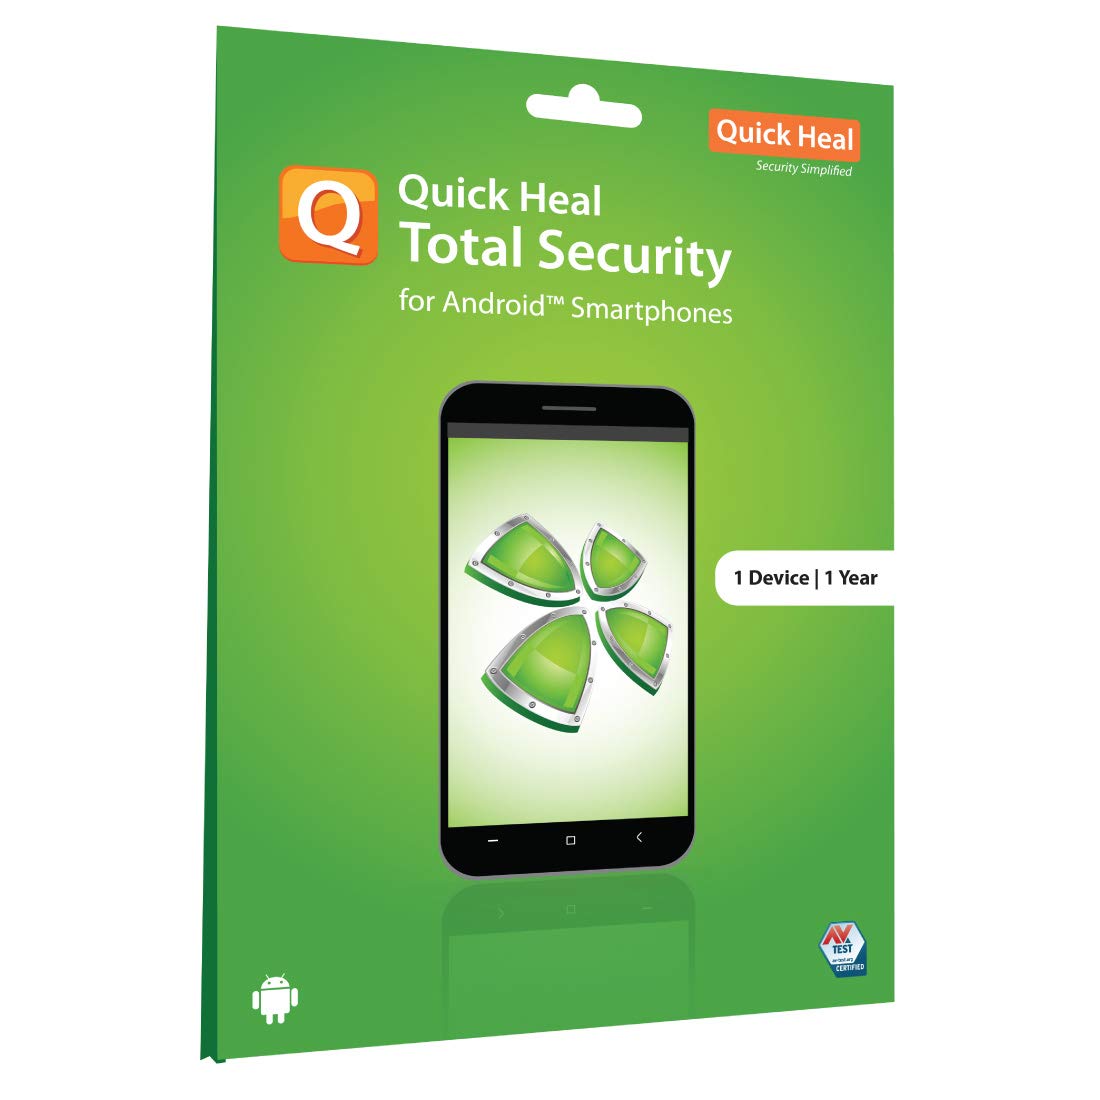 1671614791.Quick Heal Mobile Security key